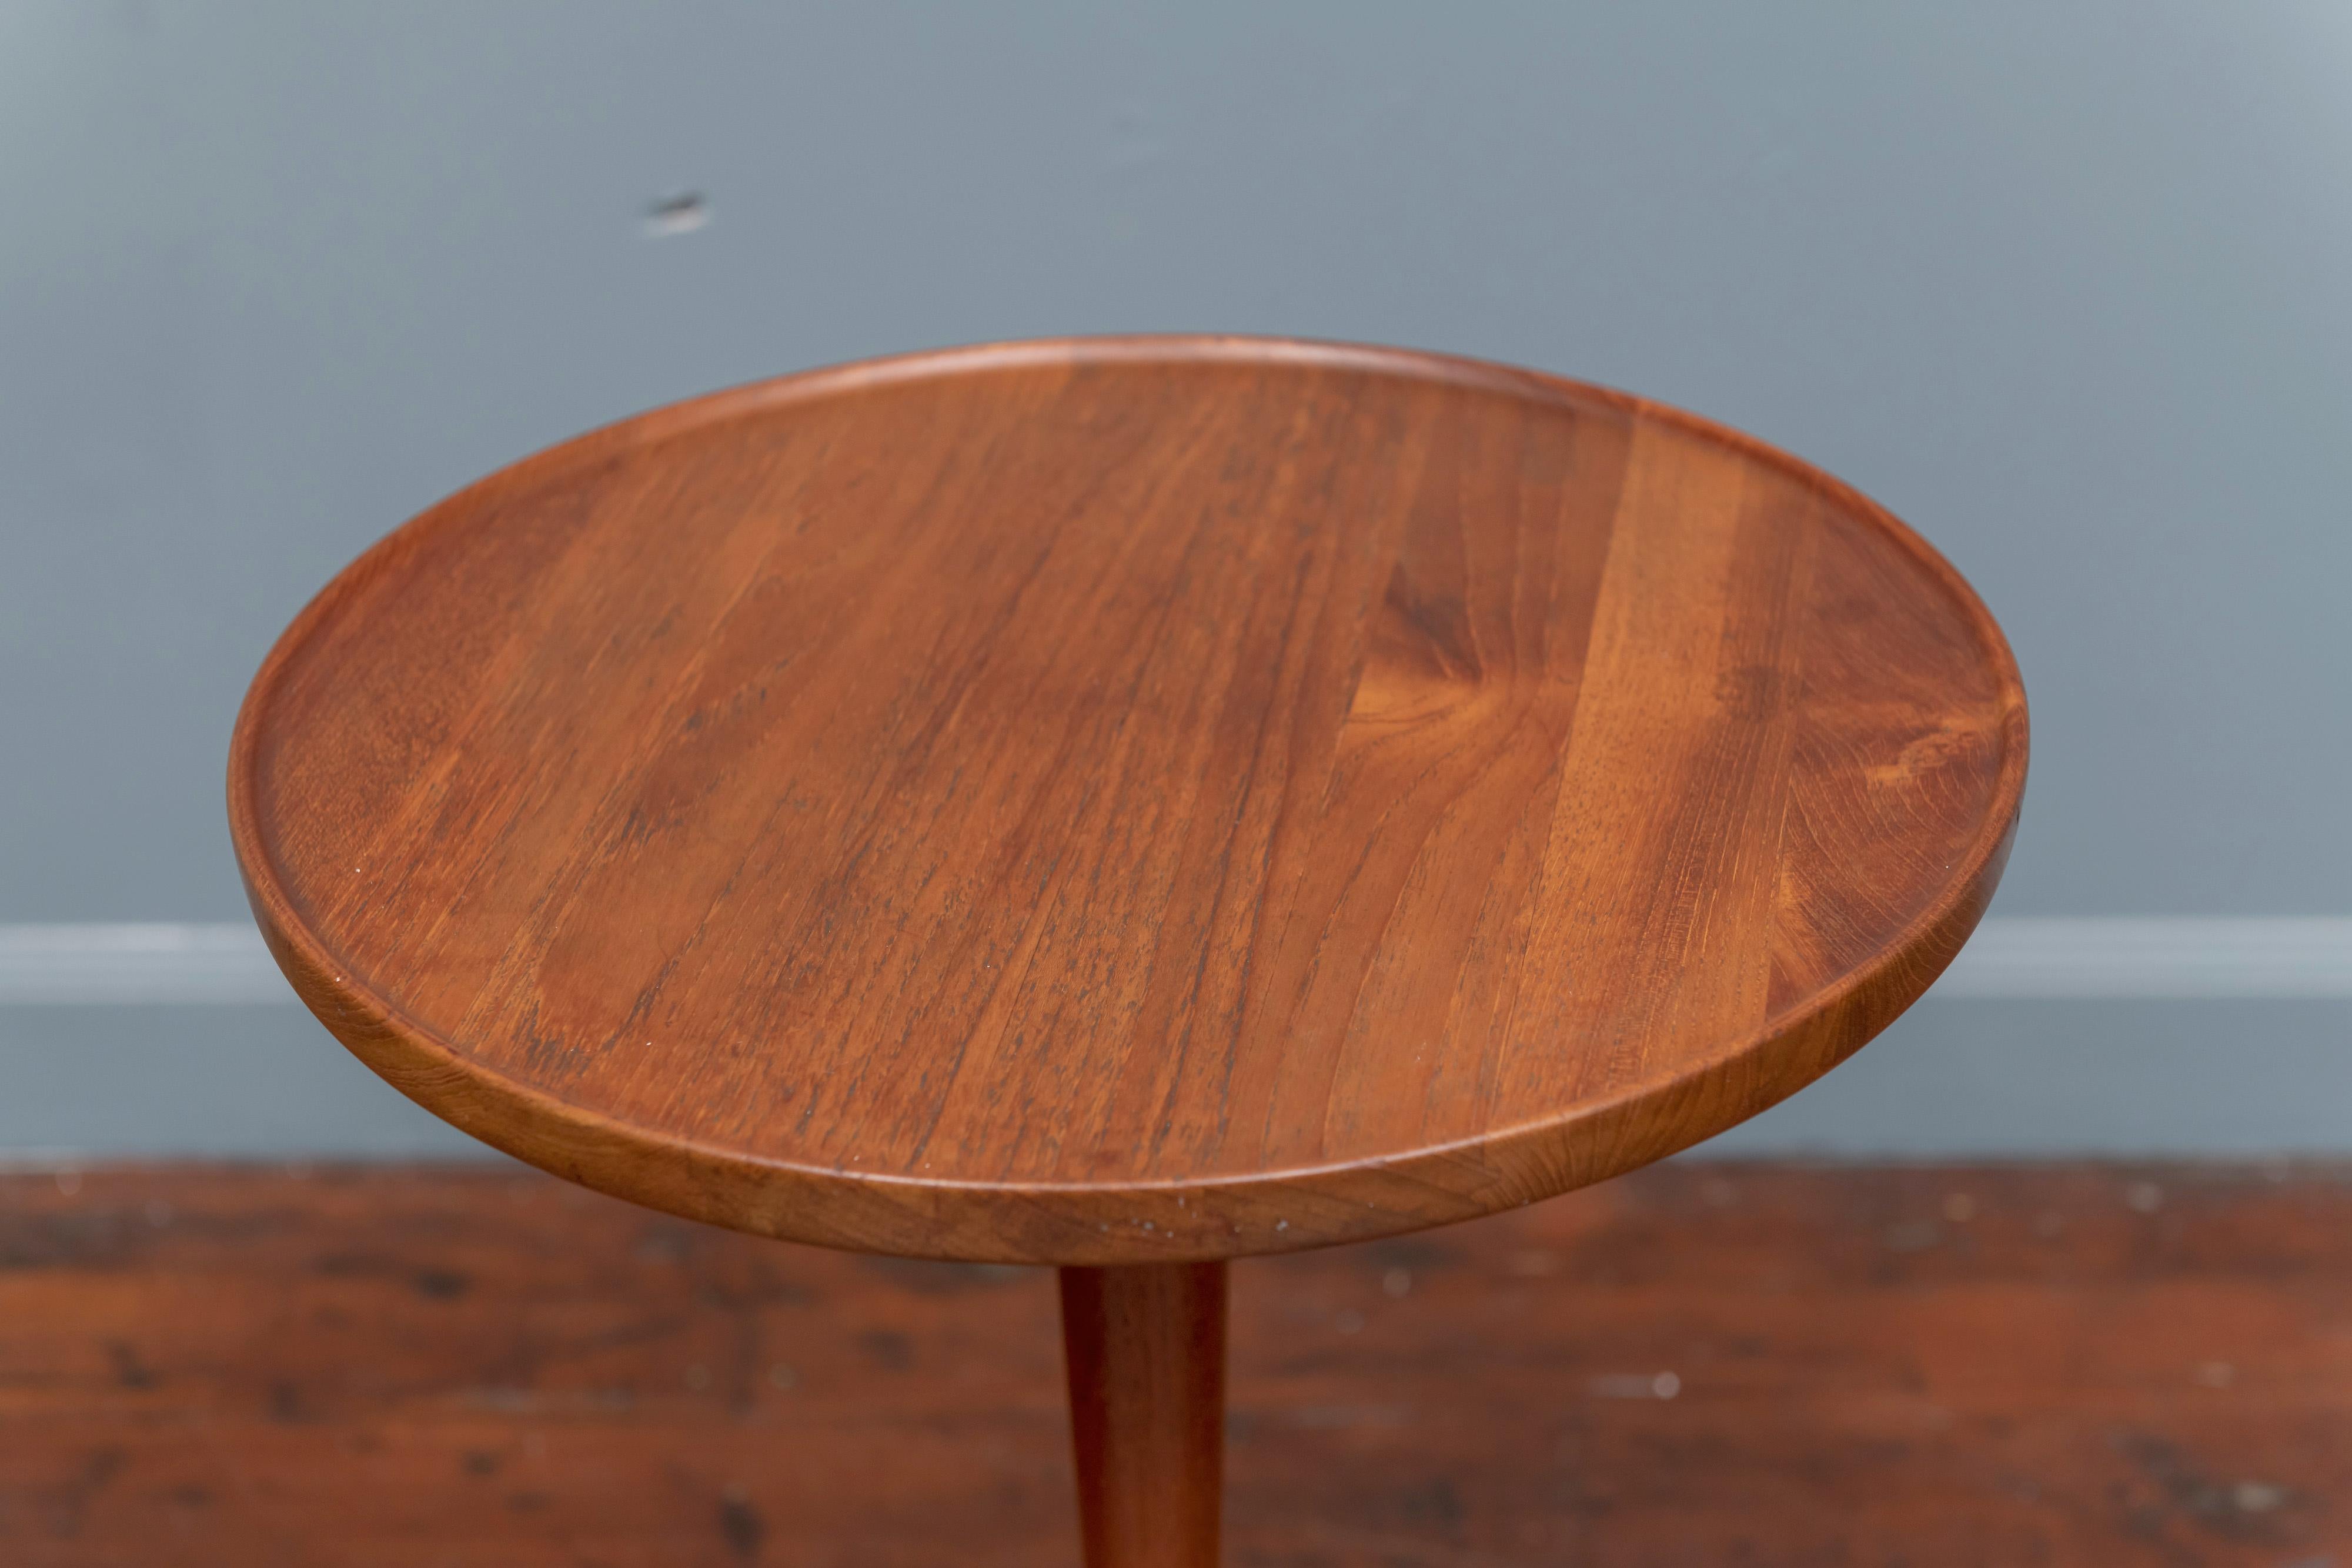 Mid-Century Modern Hans Andersen design turned and sculpted teak side table, Denmark.
In excellent original condition.